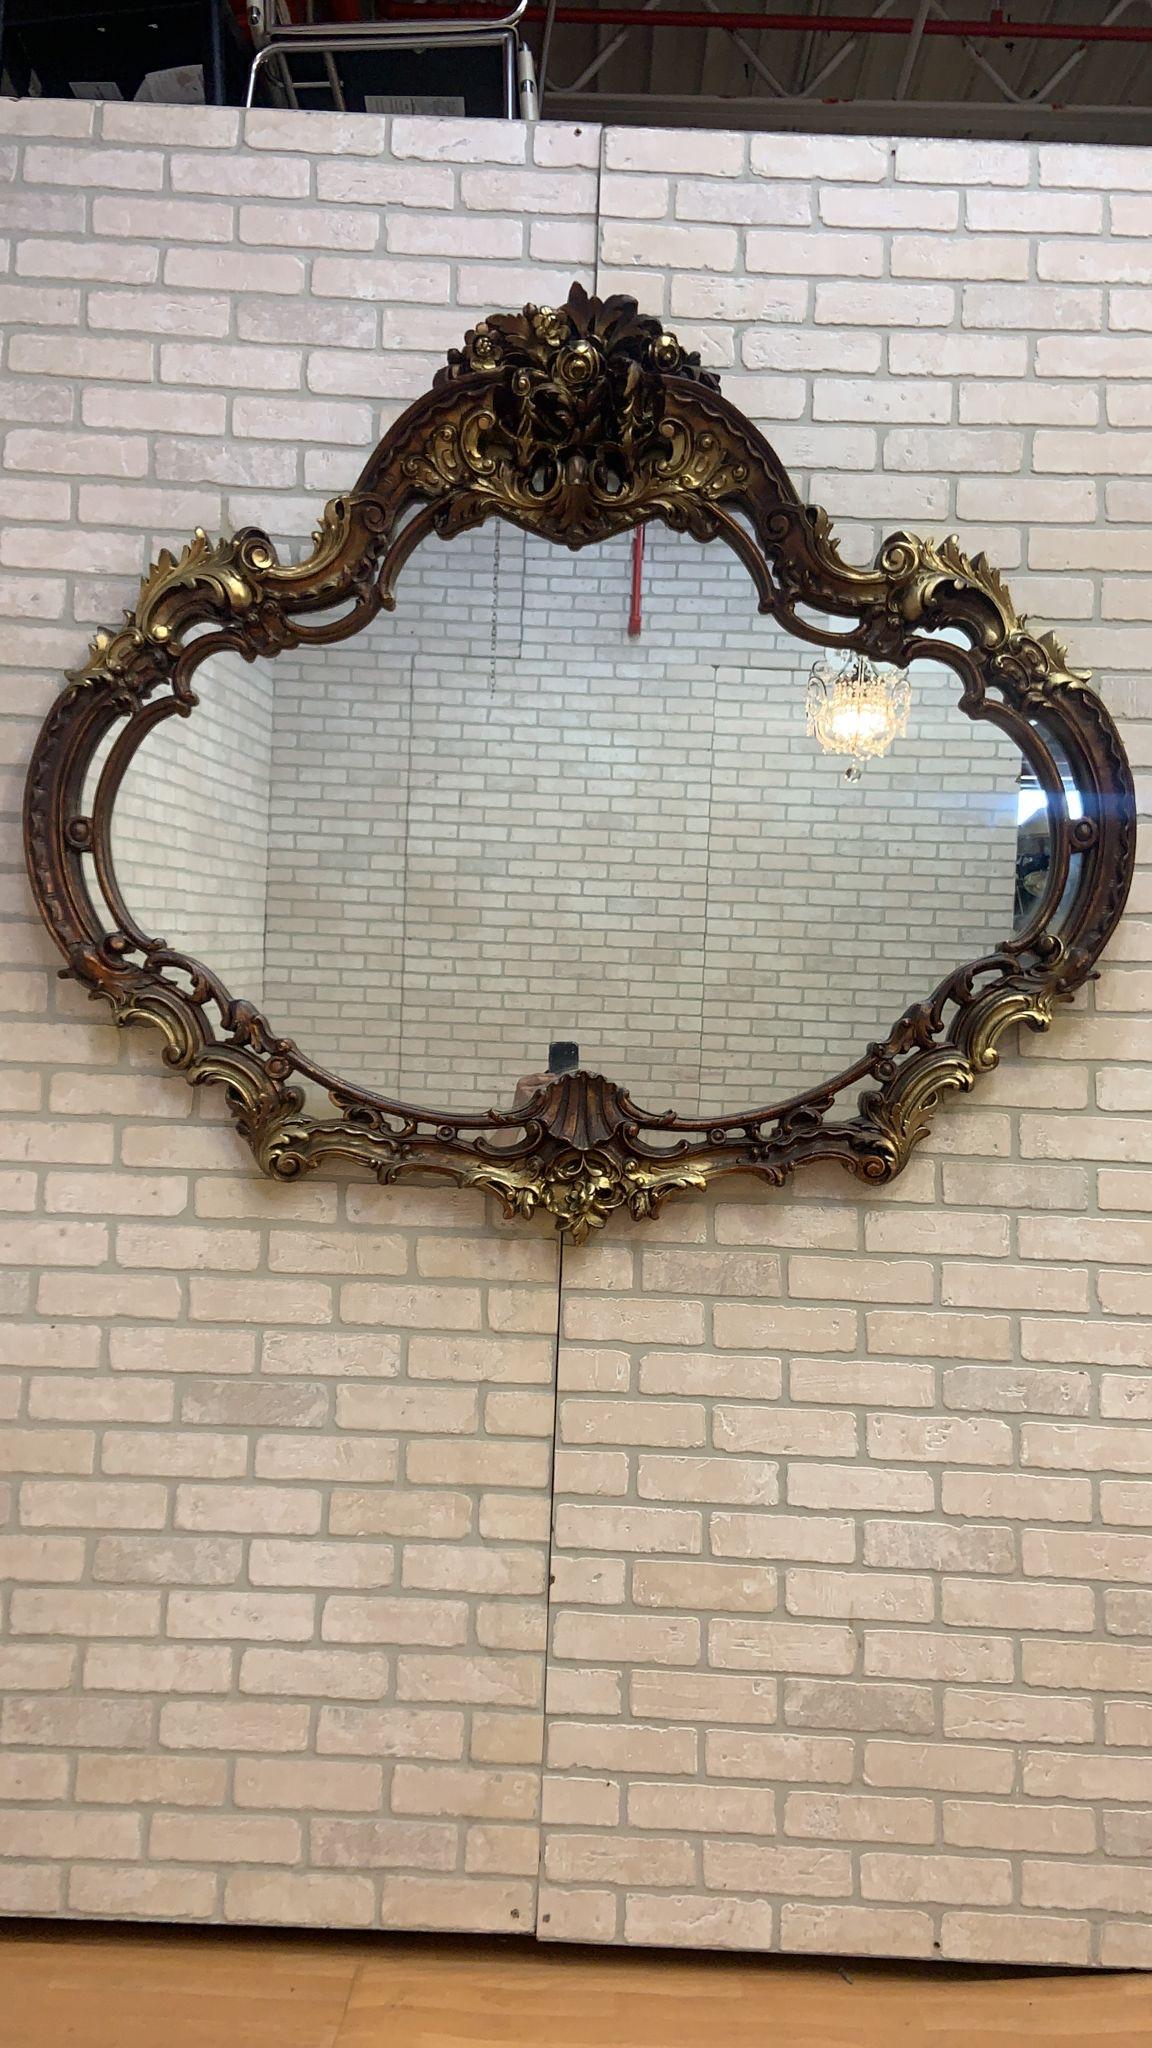 Vintage Rococo Revival Style Carved Wall Mirror

The Vintage Rococo Revival Style Wall Mirror is a stunning embodiment of the Rococo Revival aesthetic.

The frame is adorned with lavish scrolls, elaborate foliage, and asymmetrical details, which are